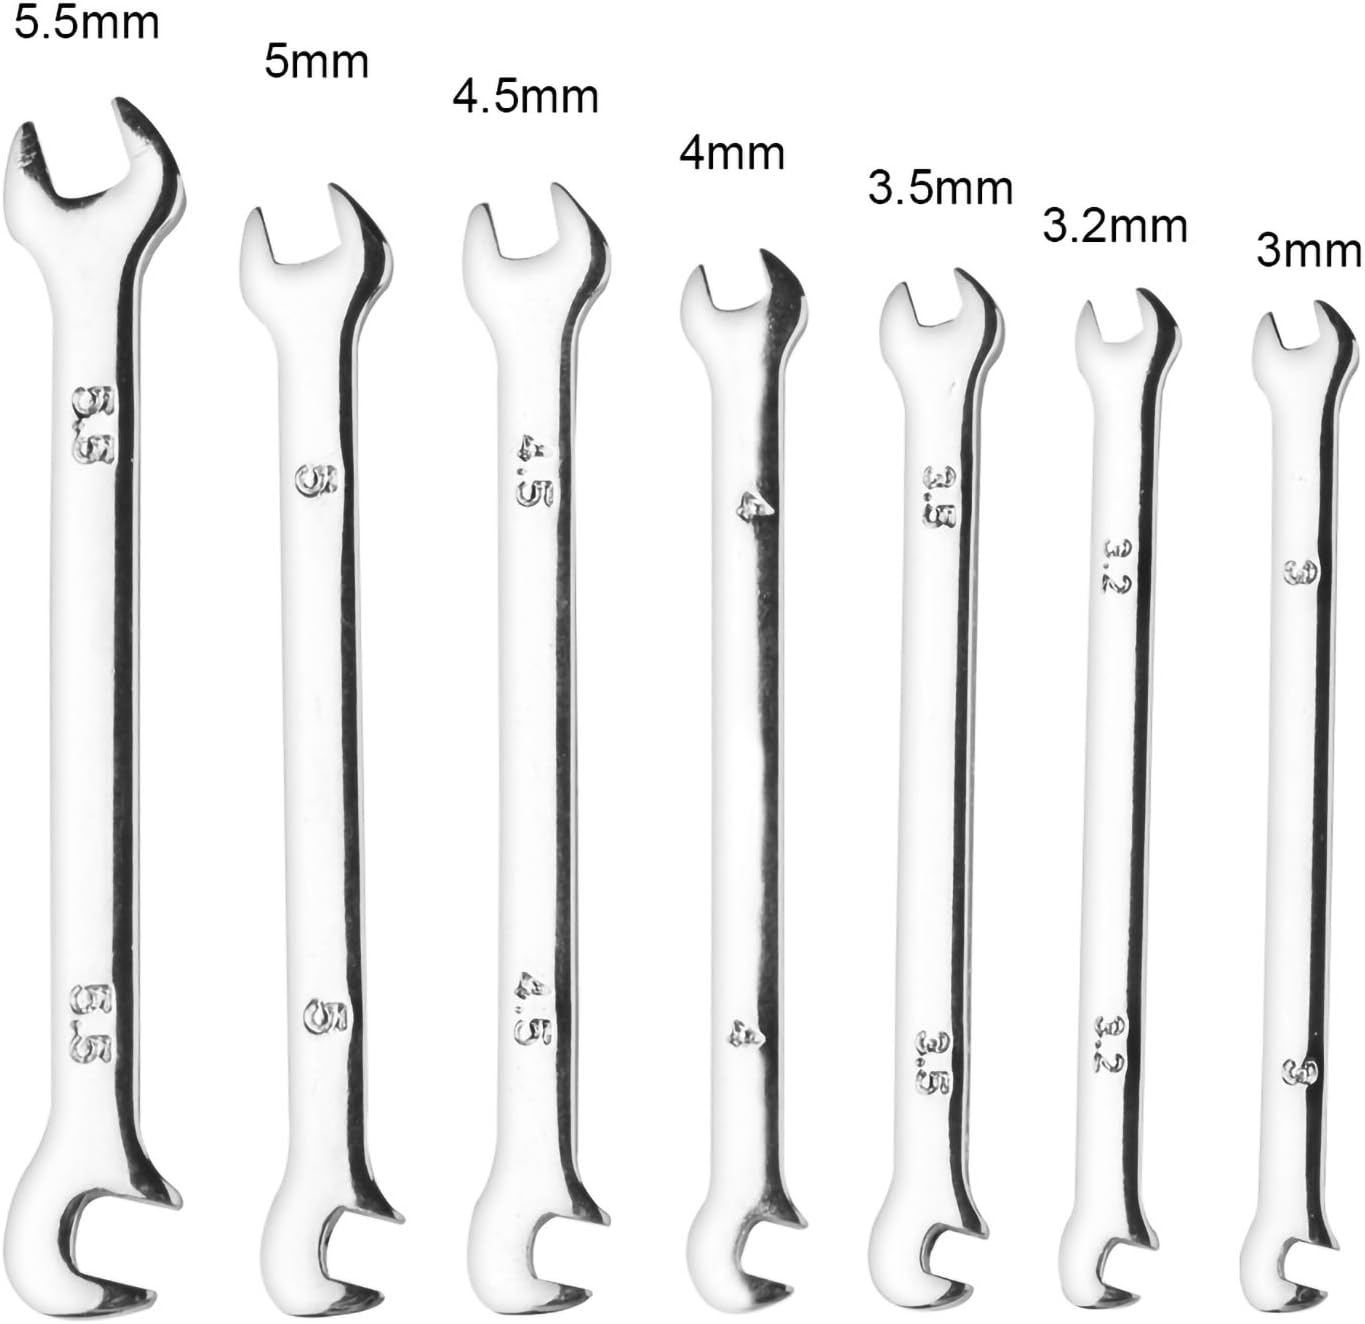 ANDUX 3mm-5.5mm Mini Double Open End Spanner 7pcs Metric Wrench MNBS-07